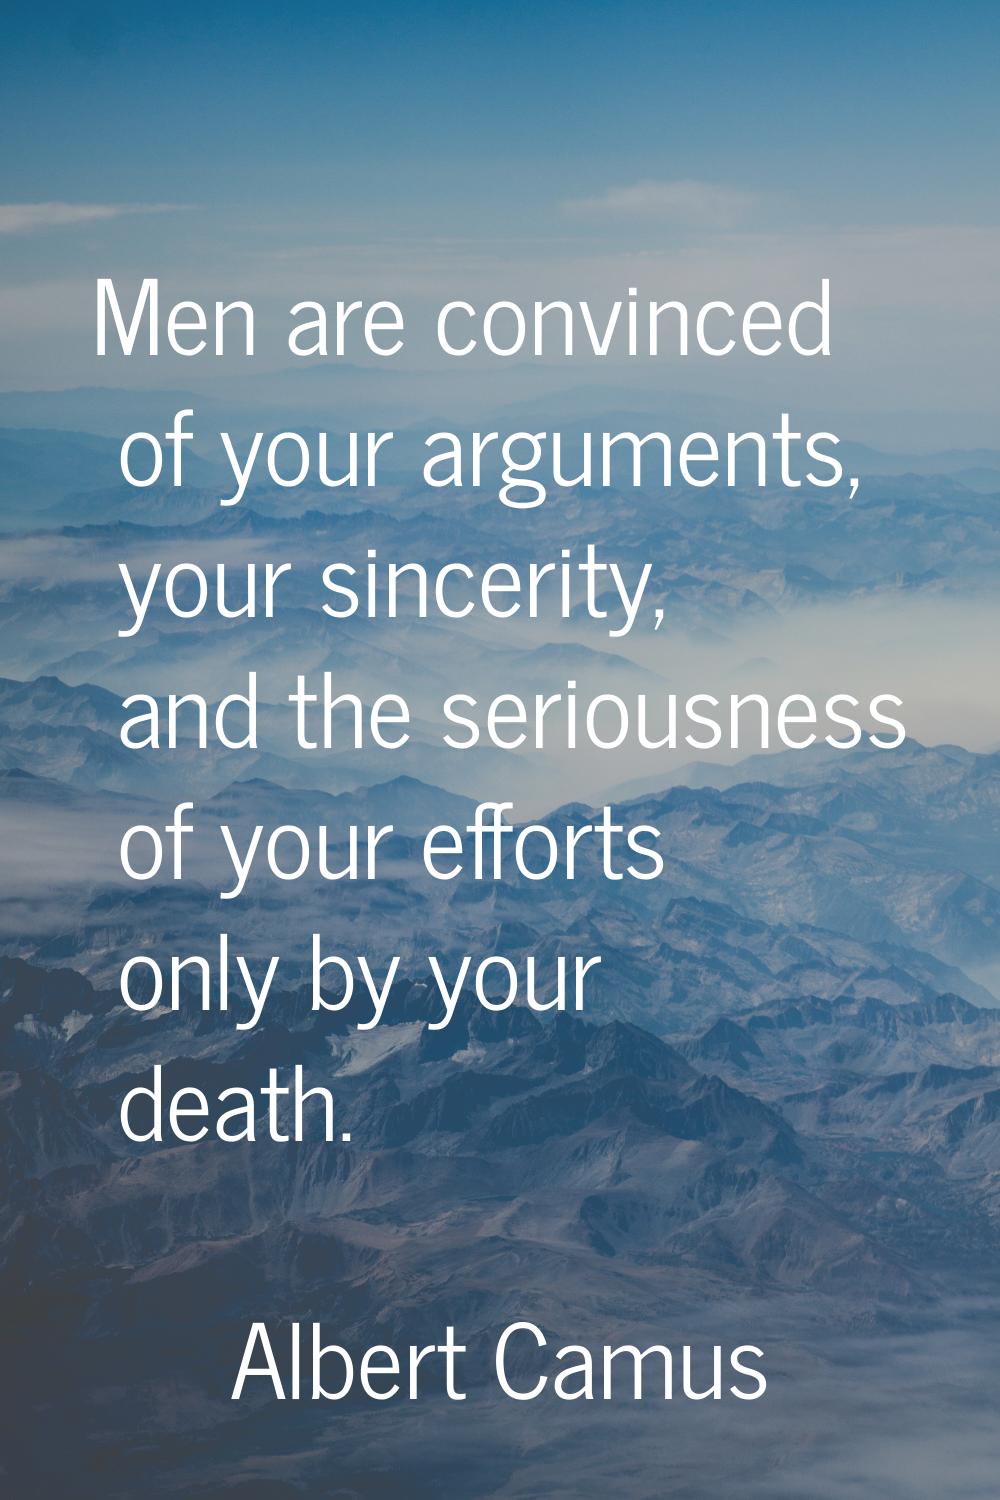 Men are convinced of your arguments, your sincerity, and the seriousness of your efforts only by yo